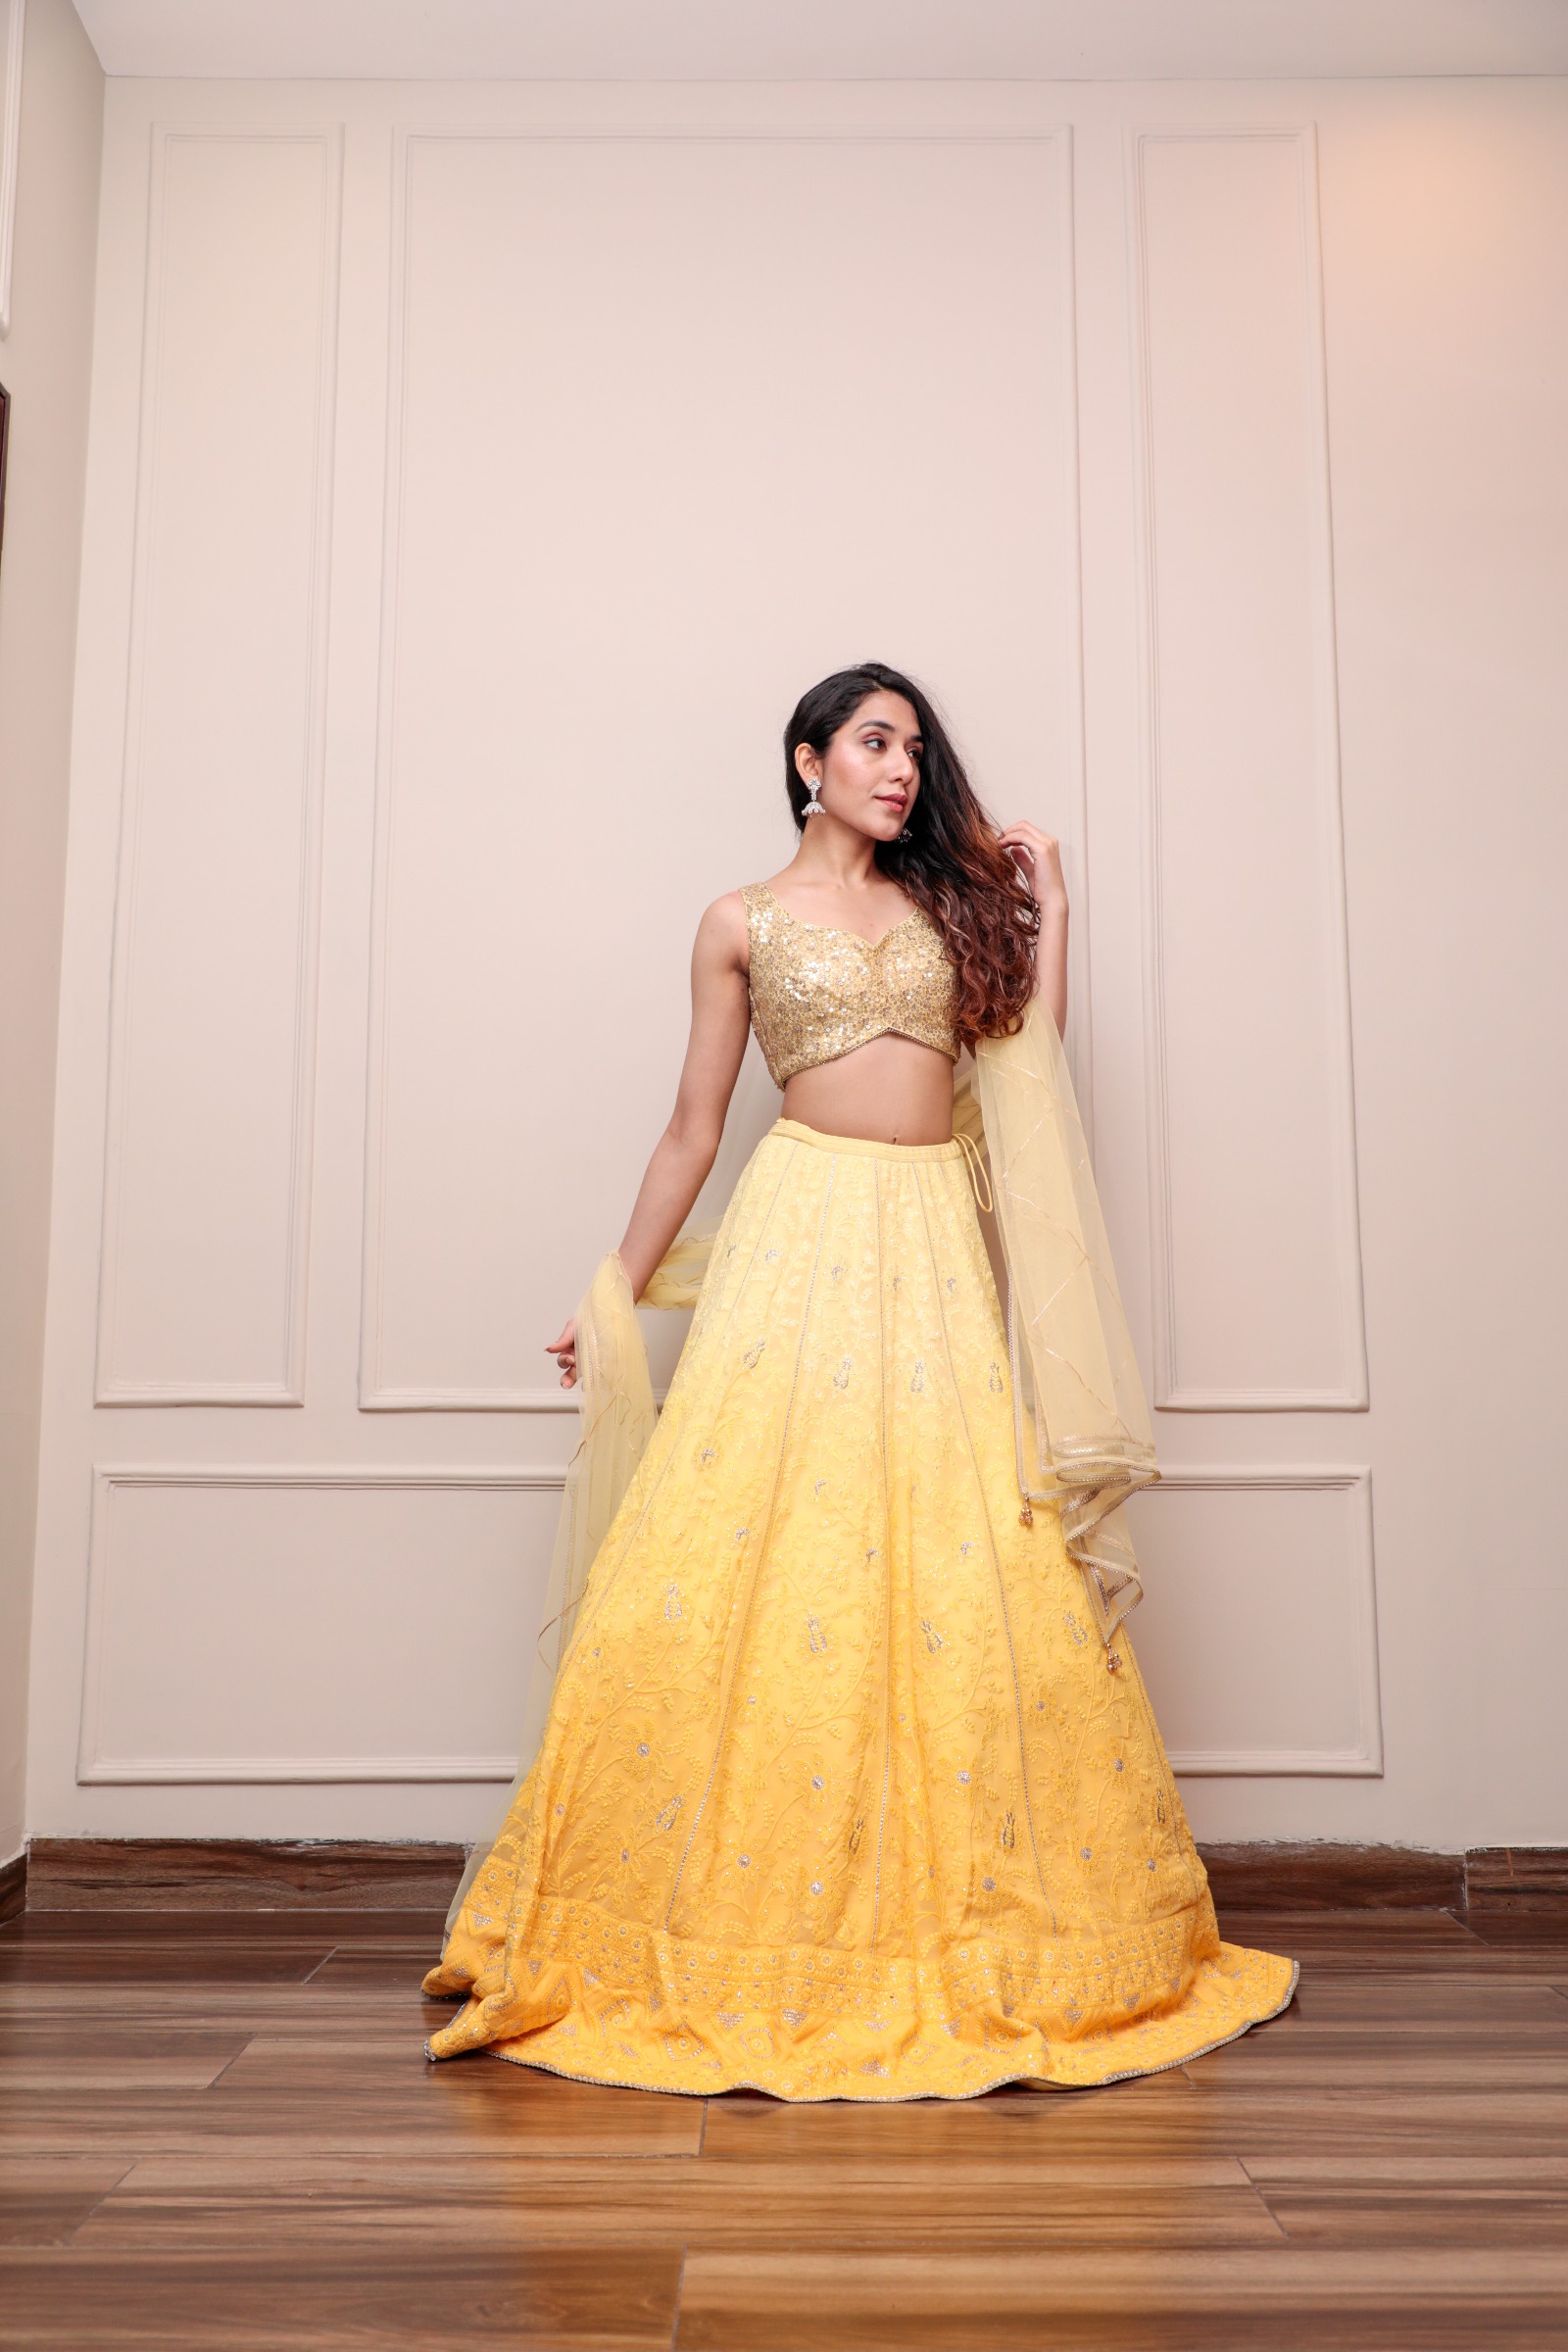 The Prettiest Yellow Lehengas We Spotted For You To Consider For Your  Haldi! | Indian outfits, Yellow lehenga, Bridal lehenga choli